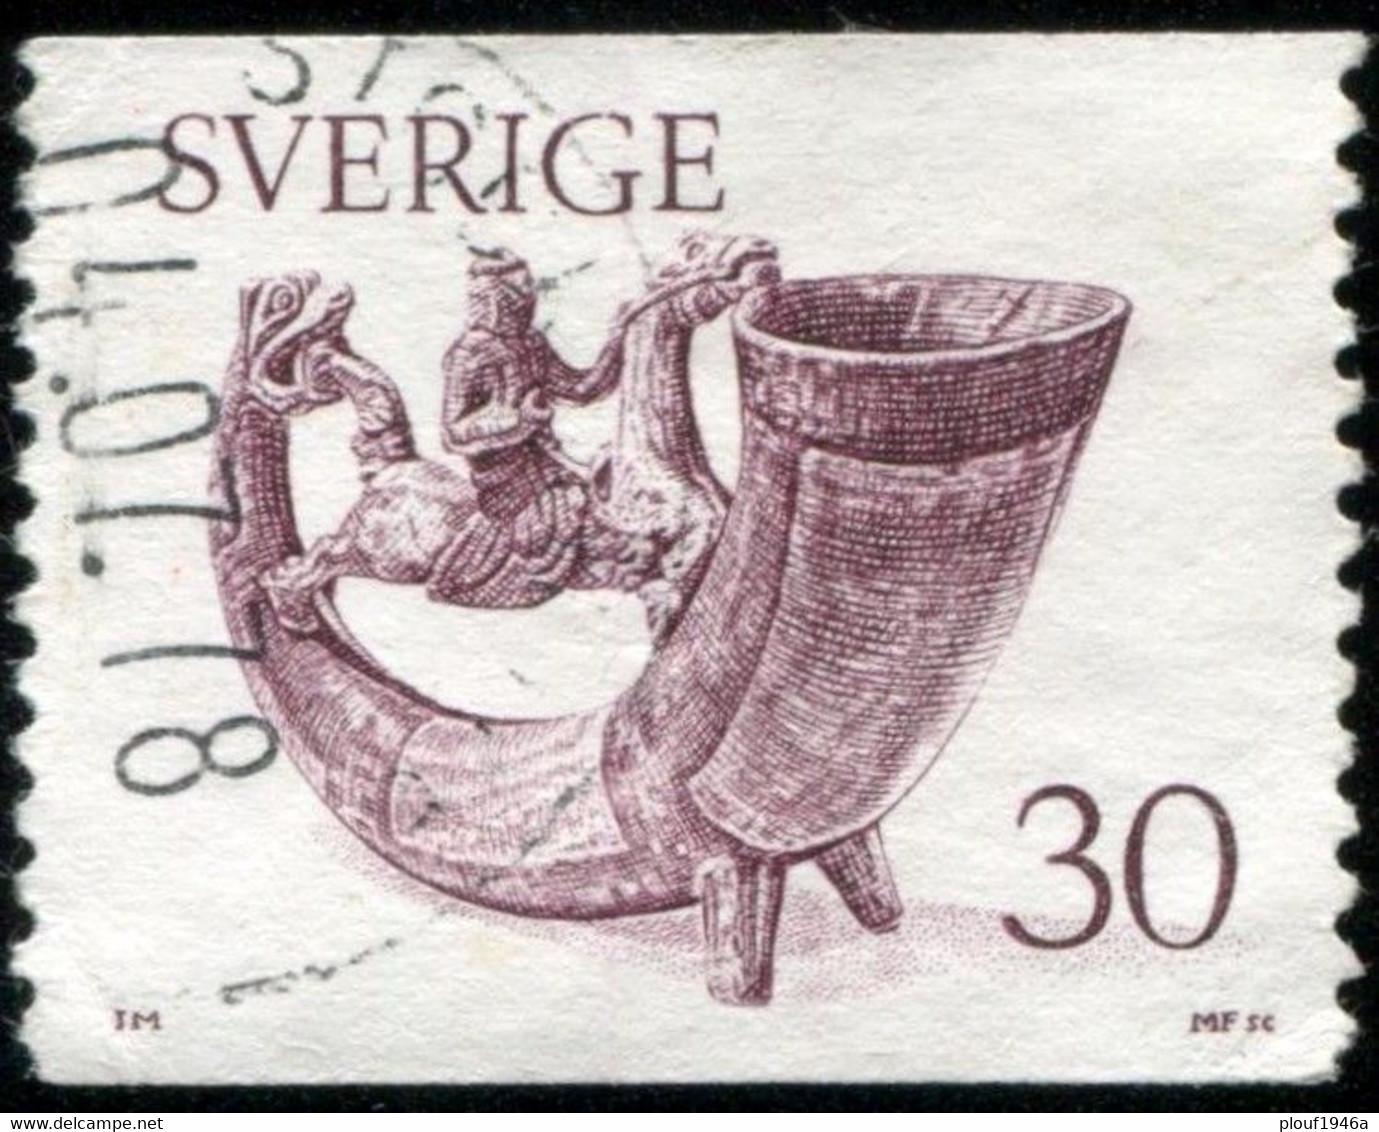 Pays : 452,05 (Suède : Charles XVI Gustave)  Yvert Et Tellier N° :  936 (o) - Used Stamps